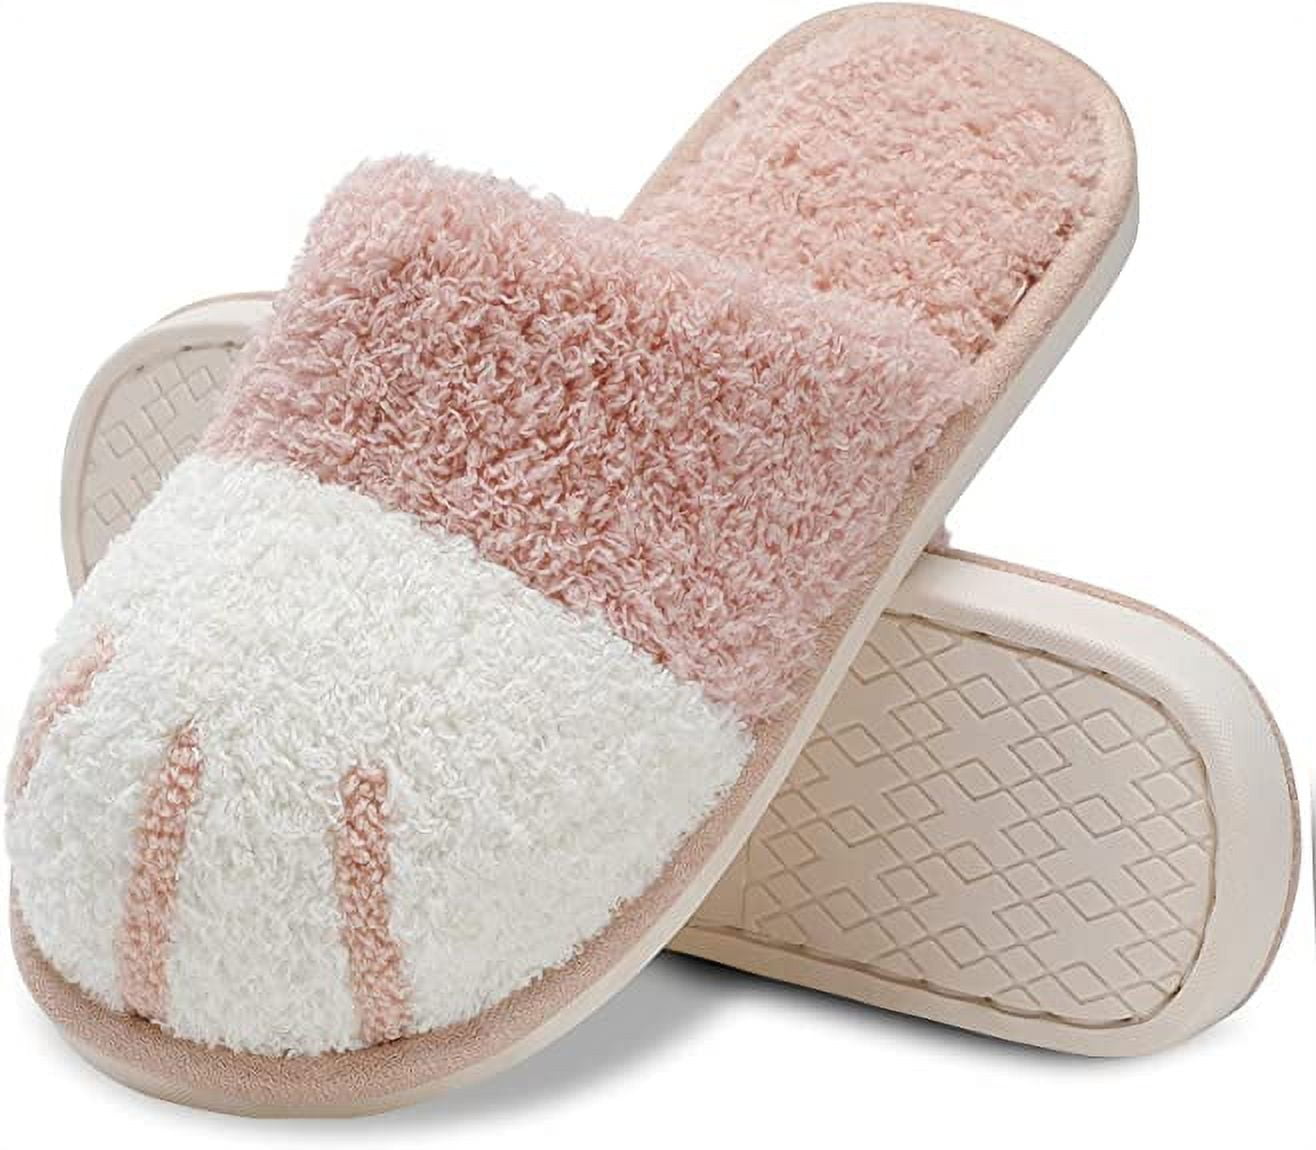 Disposable Open Toe Towel Slippers With Rubber Sole